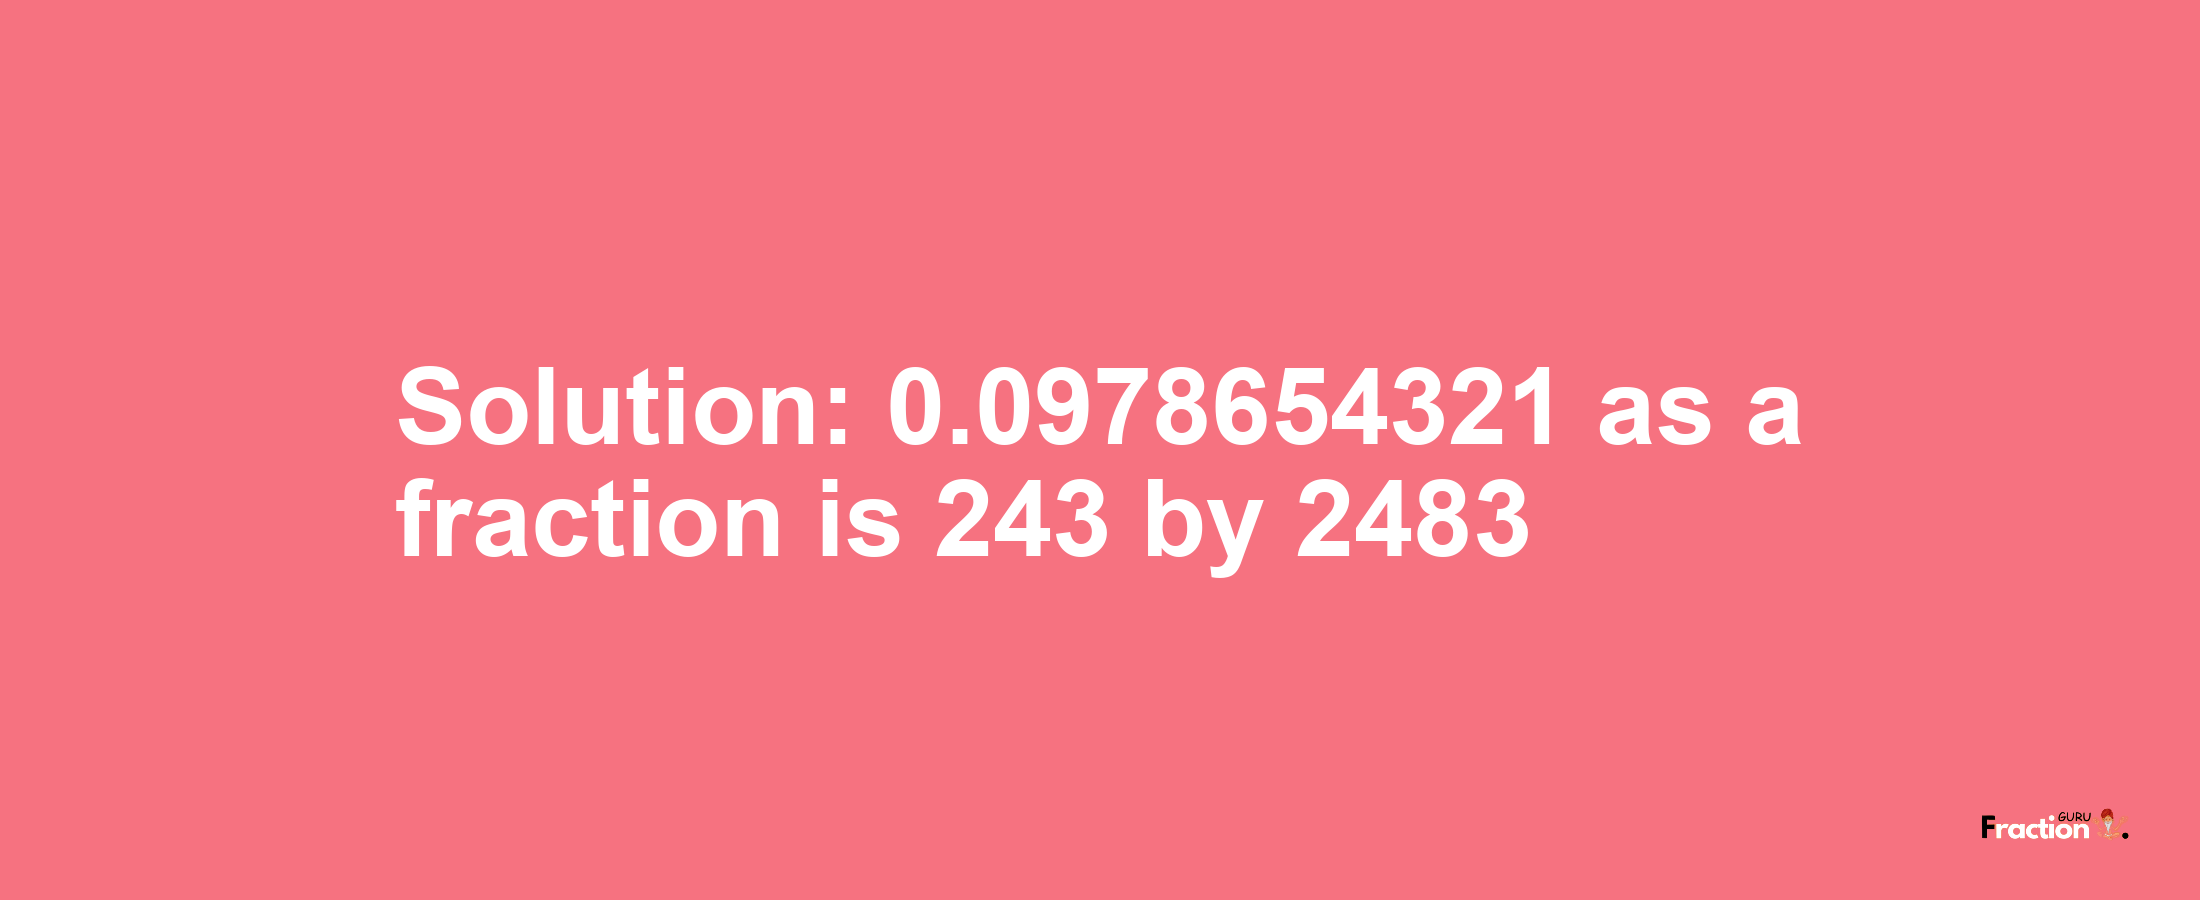 Solution:0.0978654321 as a fraction is 243/2483